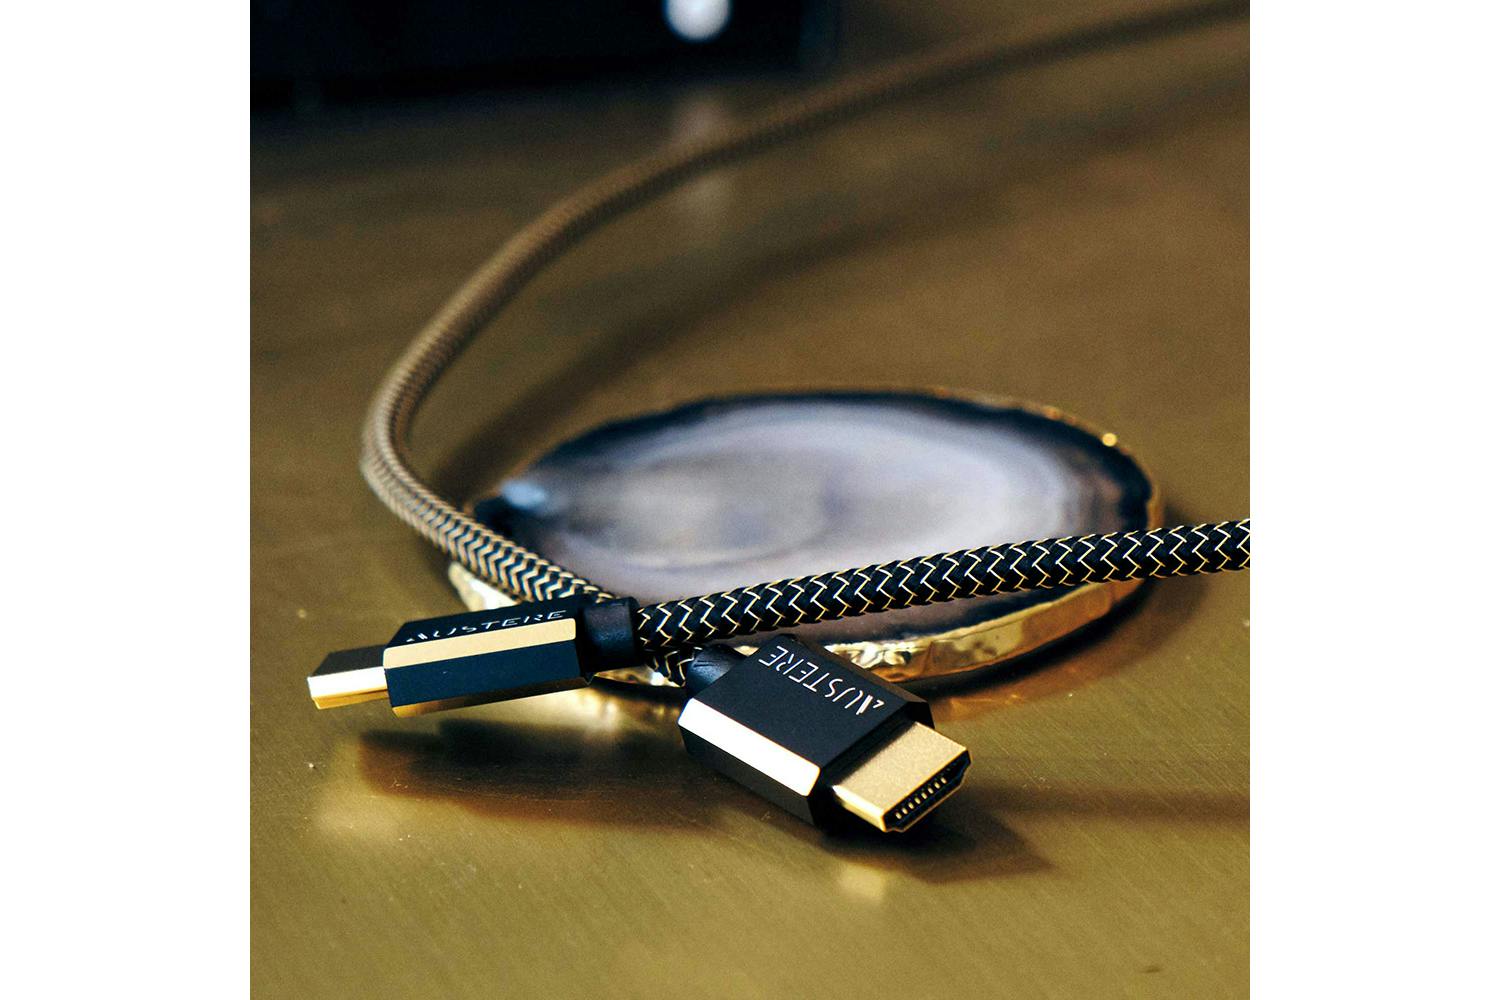 Austere III Series 4K HDMI Cable | 1.5m